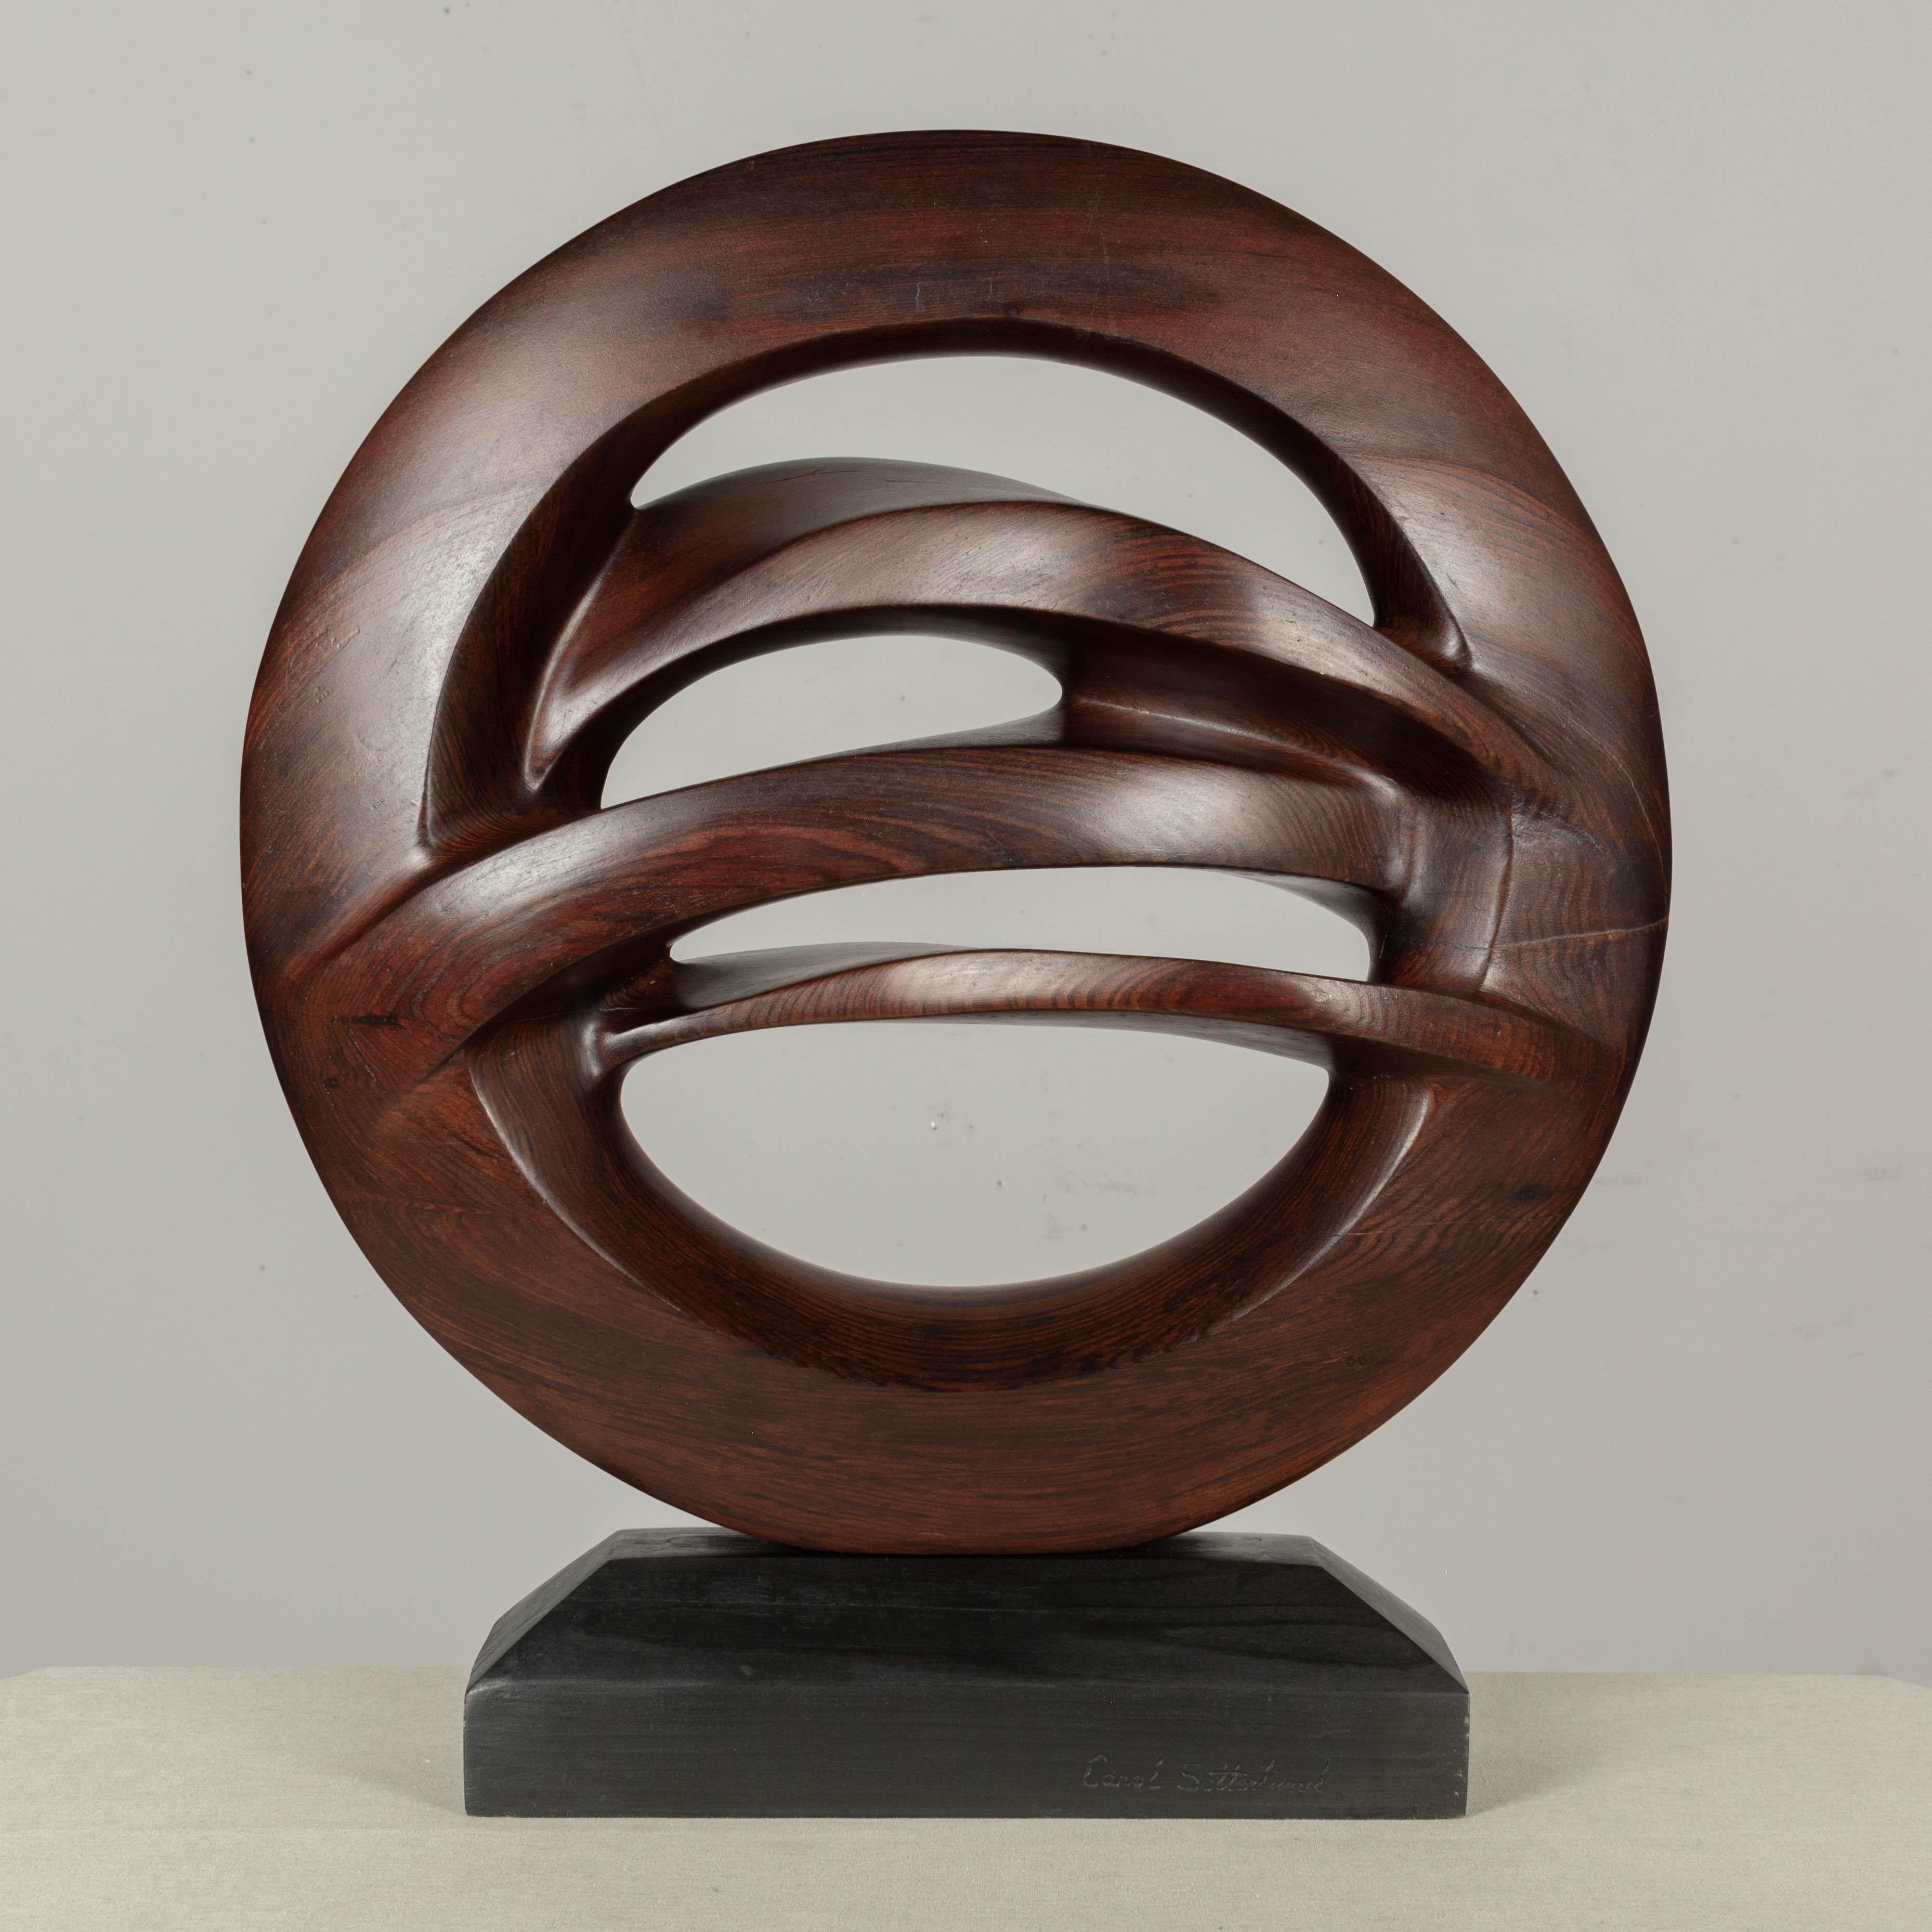 Abstract wood sculpture by California artist, Carol Setterlund (b. 1936). Smooth, organic form carved from old growth redwood, on a black rectangular plinth. Artist signature on base.